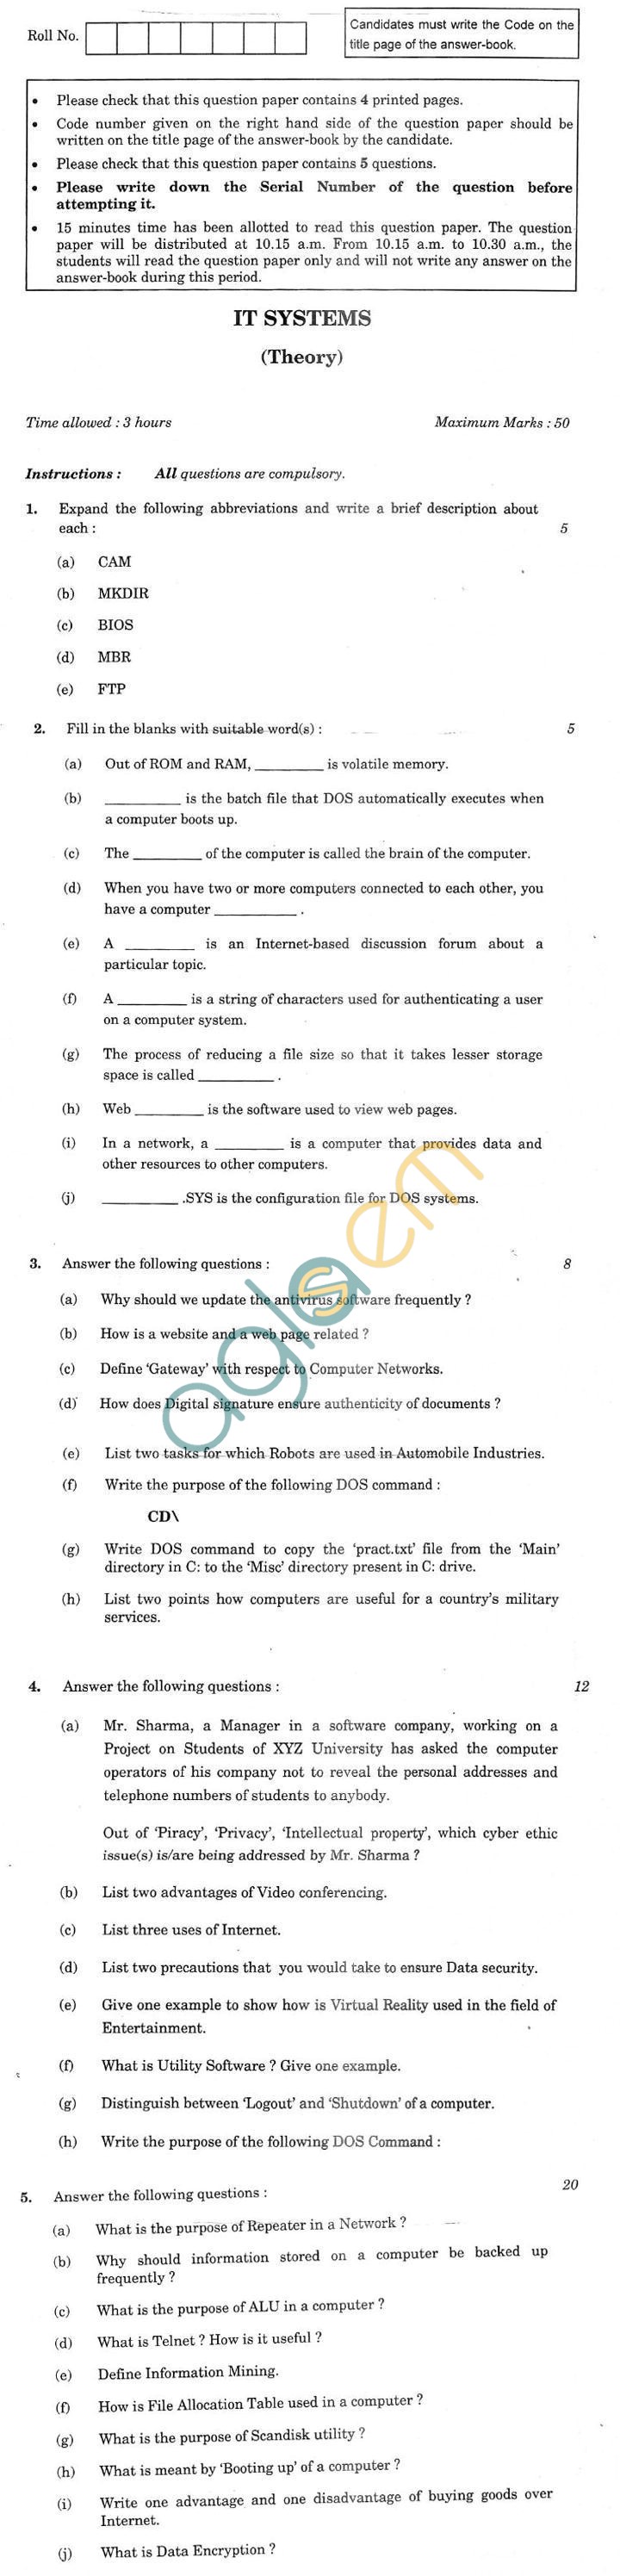 CBSE Compartment Exam 2013 Class XII Question Paper - IT System